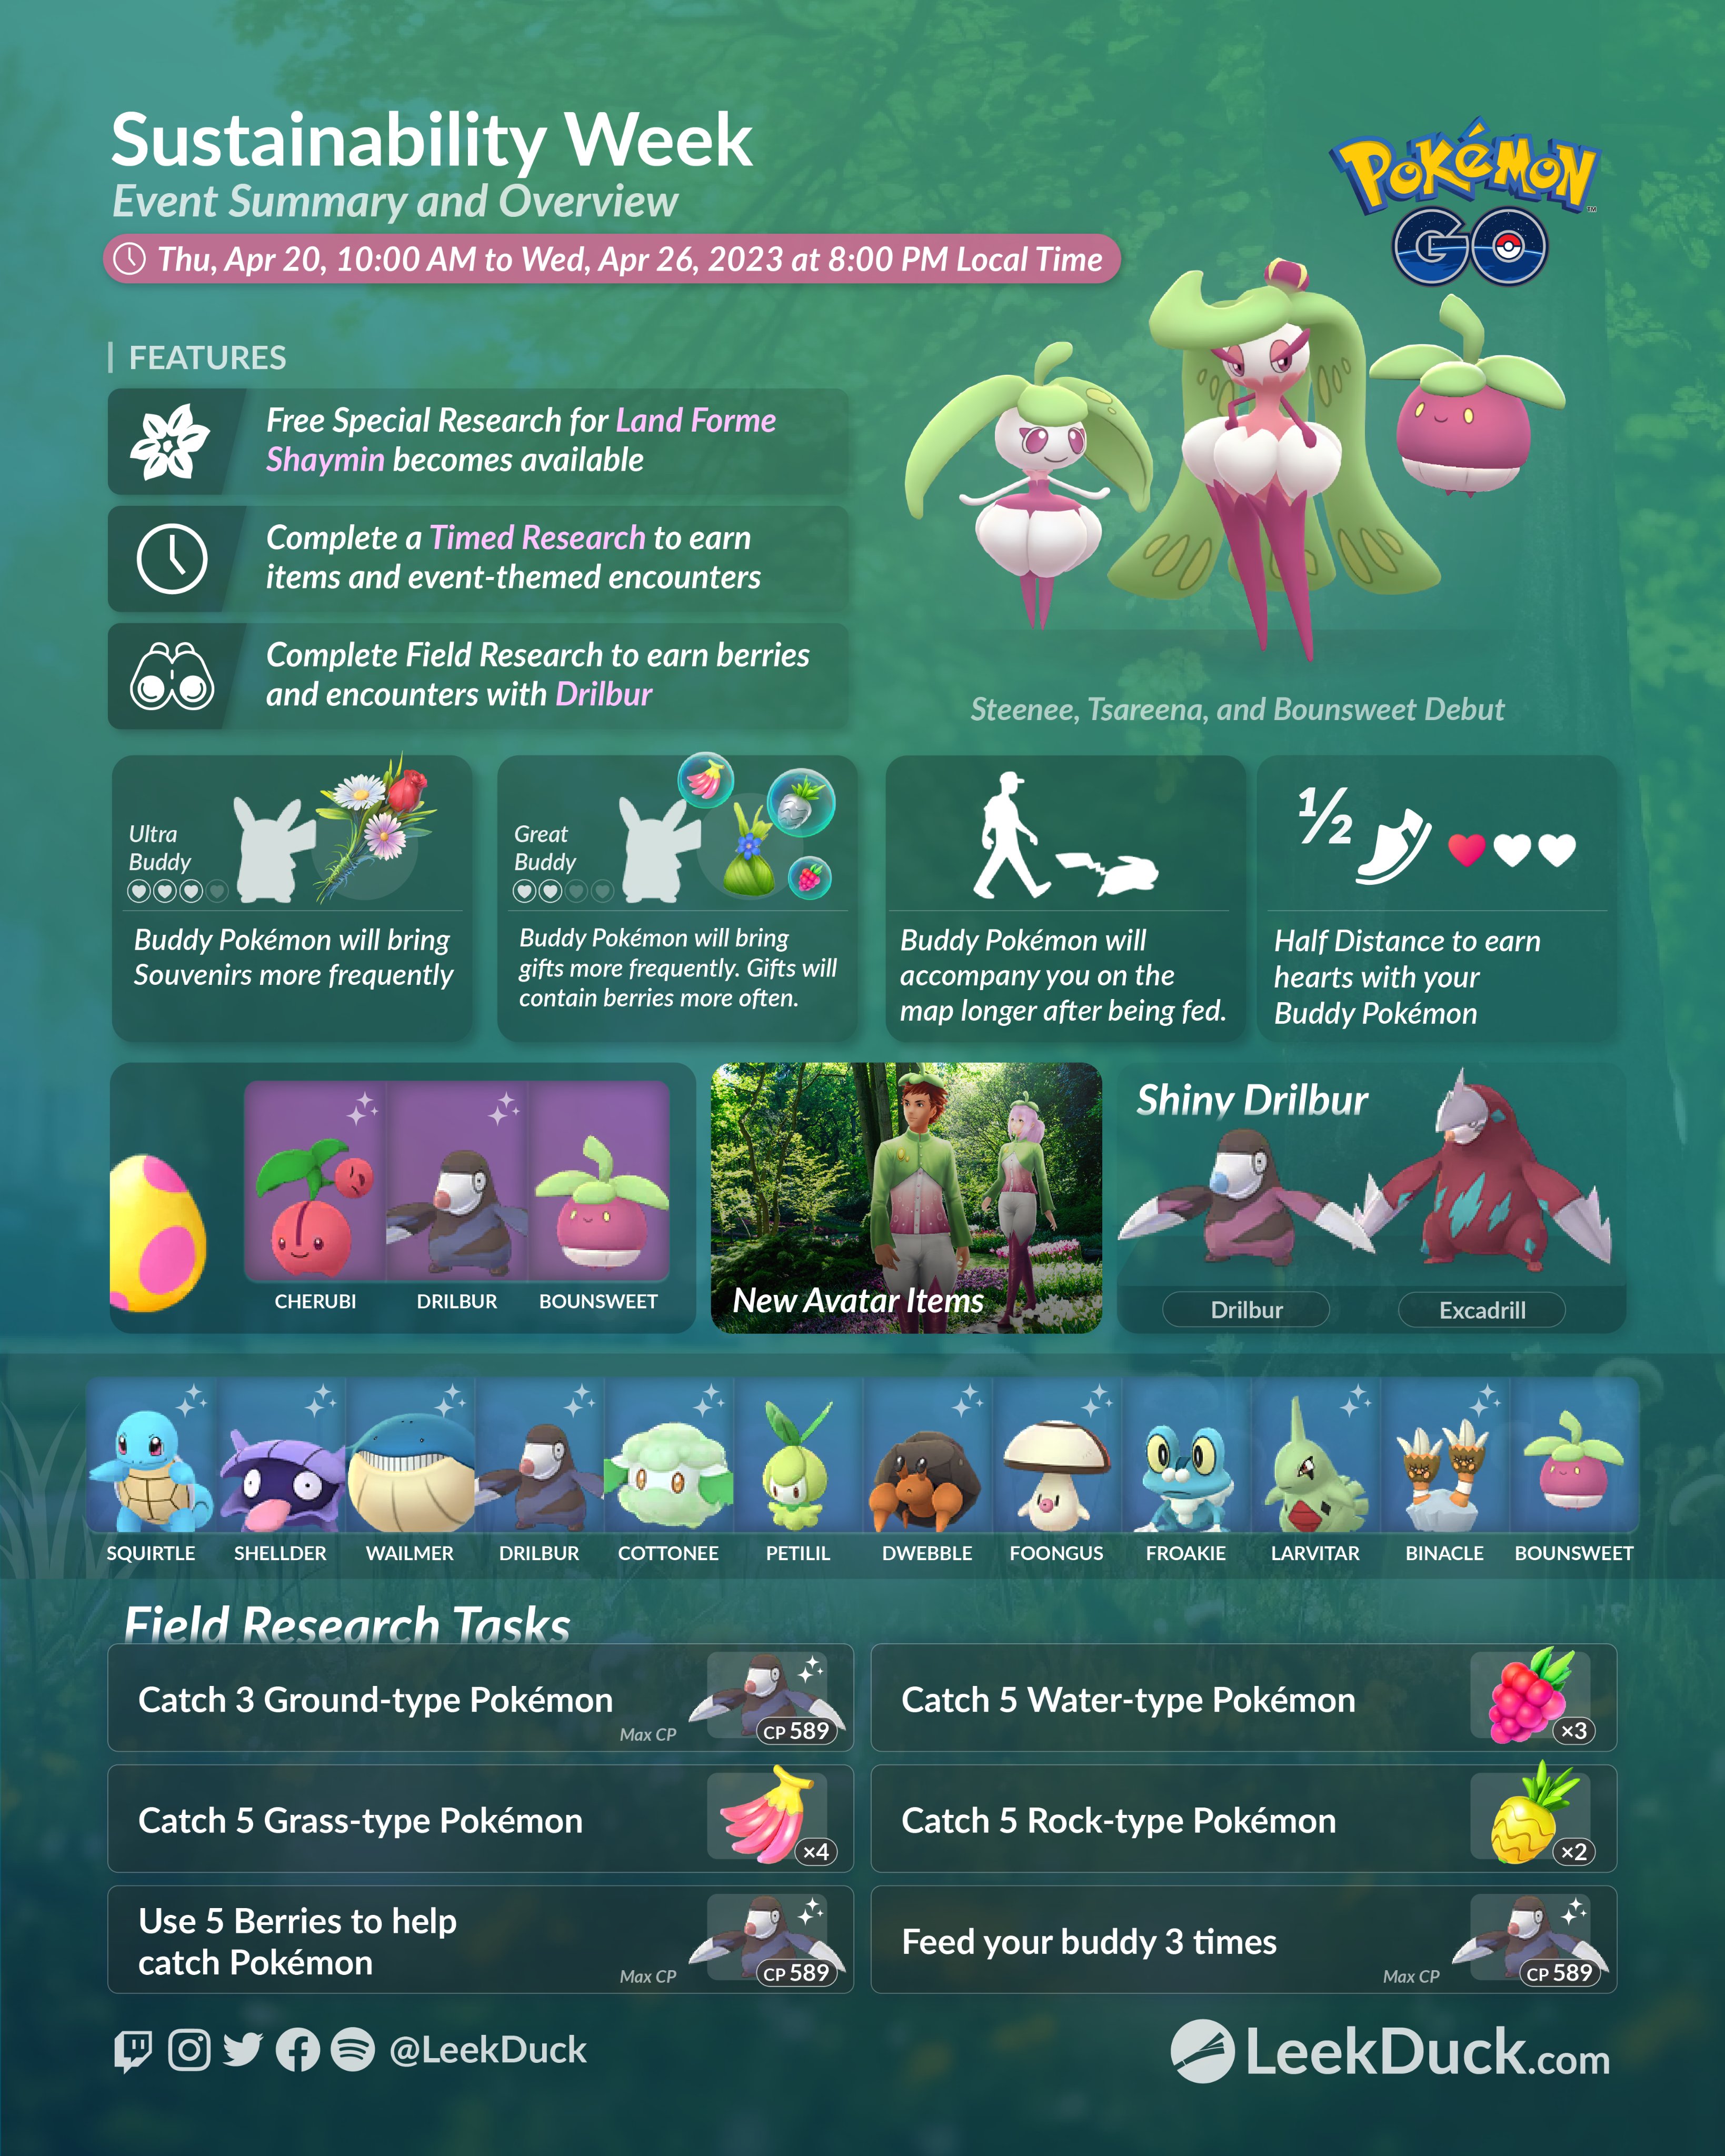 Party Up! - Leek Duck  Pokémon GO News and Resources